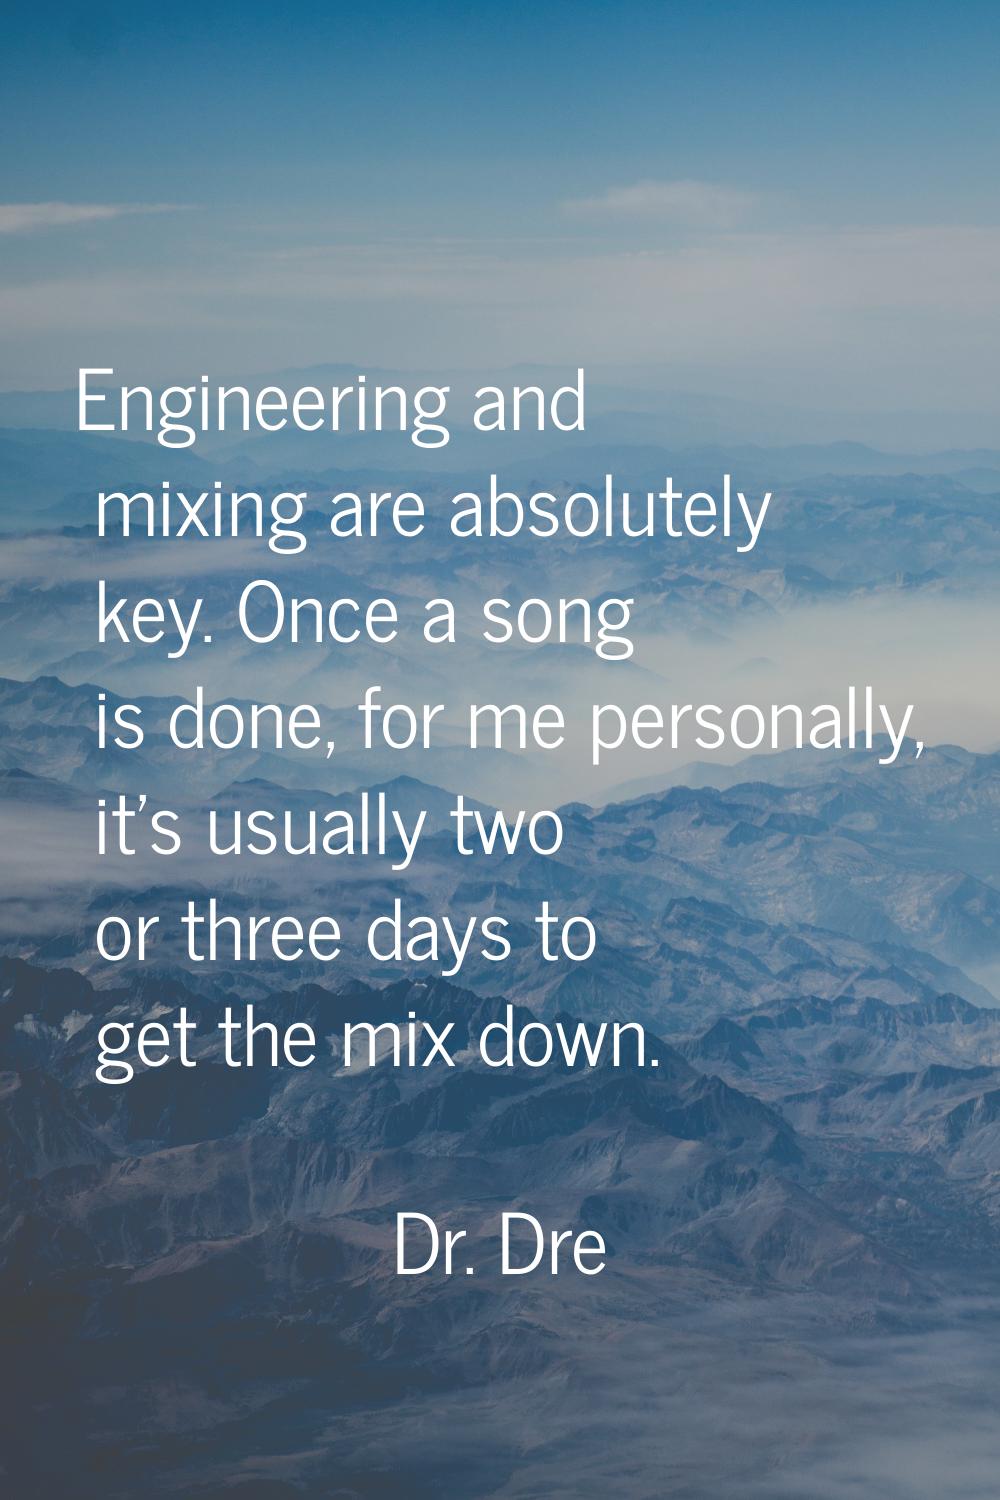 Engineering and mixing are absolutely key. Once a song is done, for me personally, it's usually two